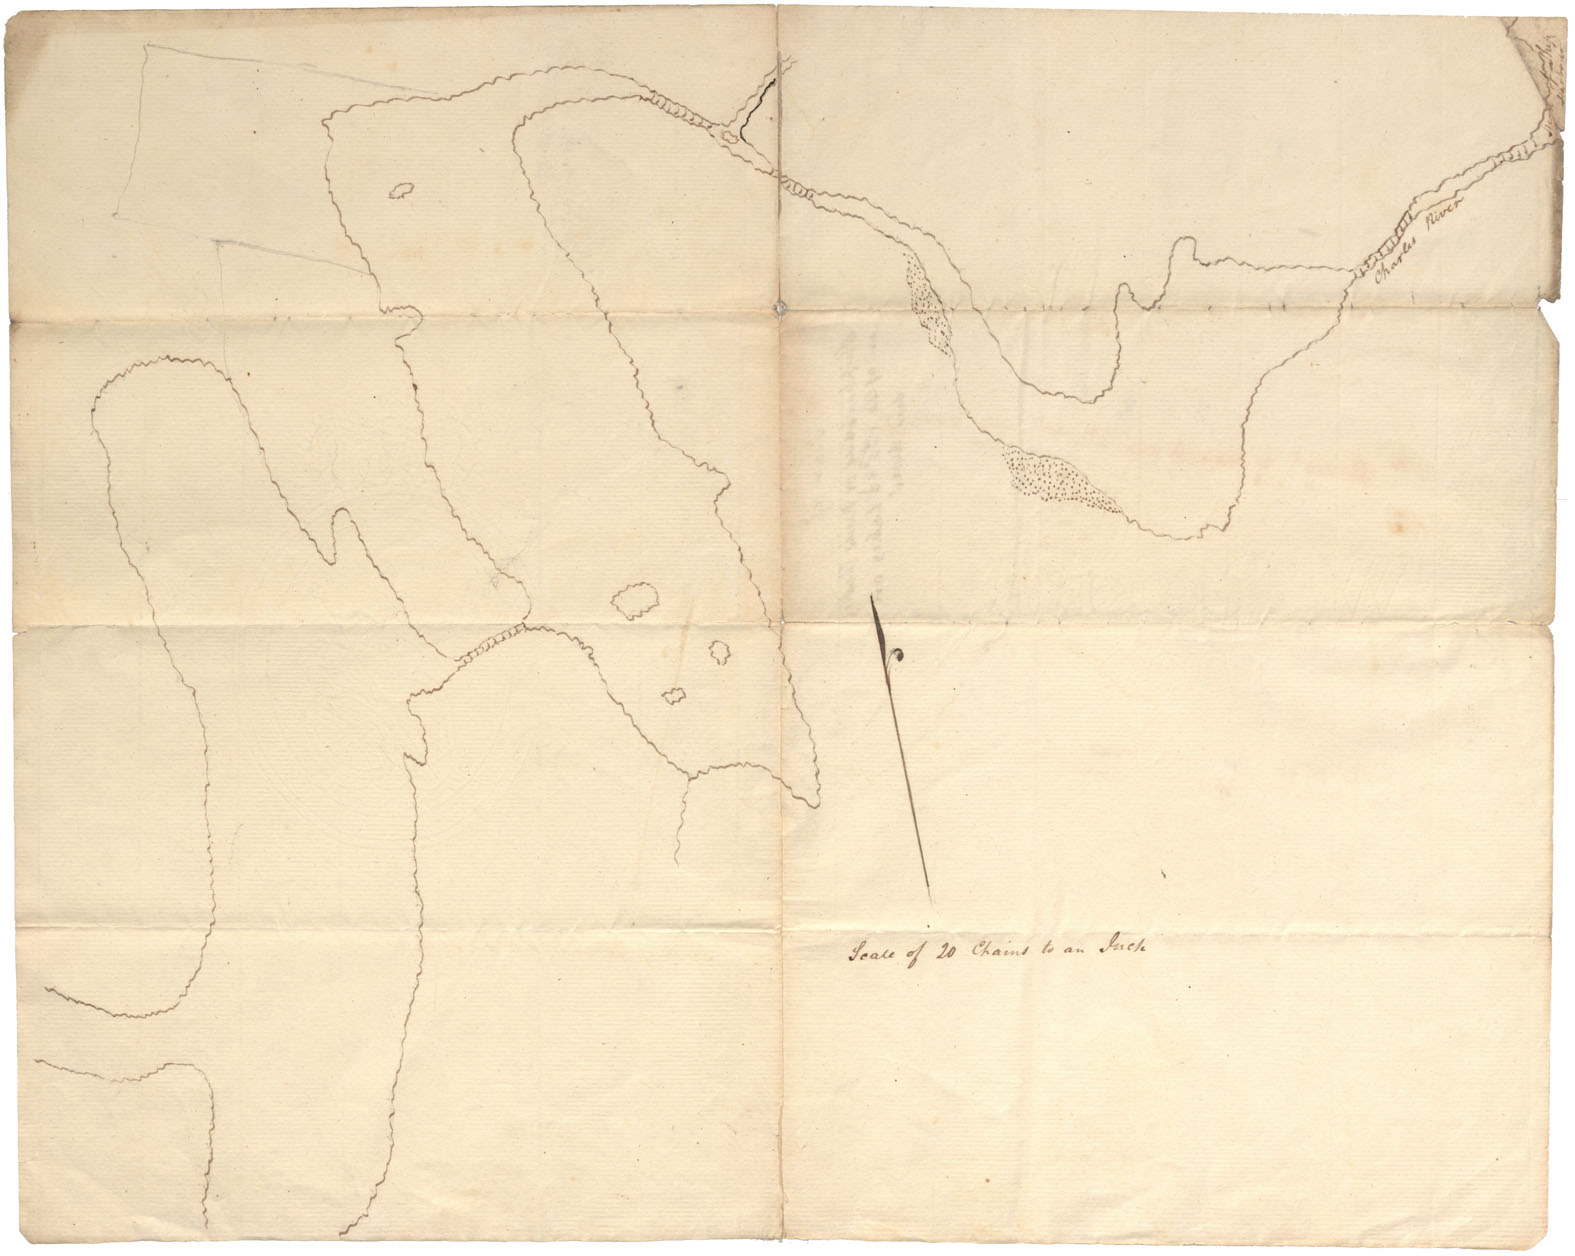 Halifax County Ships Harbour, River Charles and 1st, 2nd, & 3rd Lakes on said river. W.m.1809